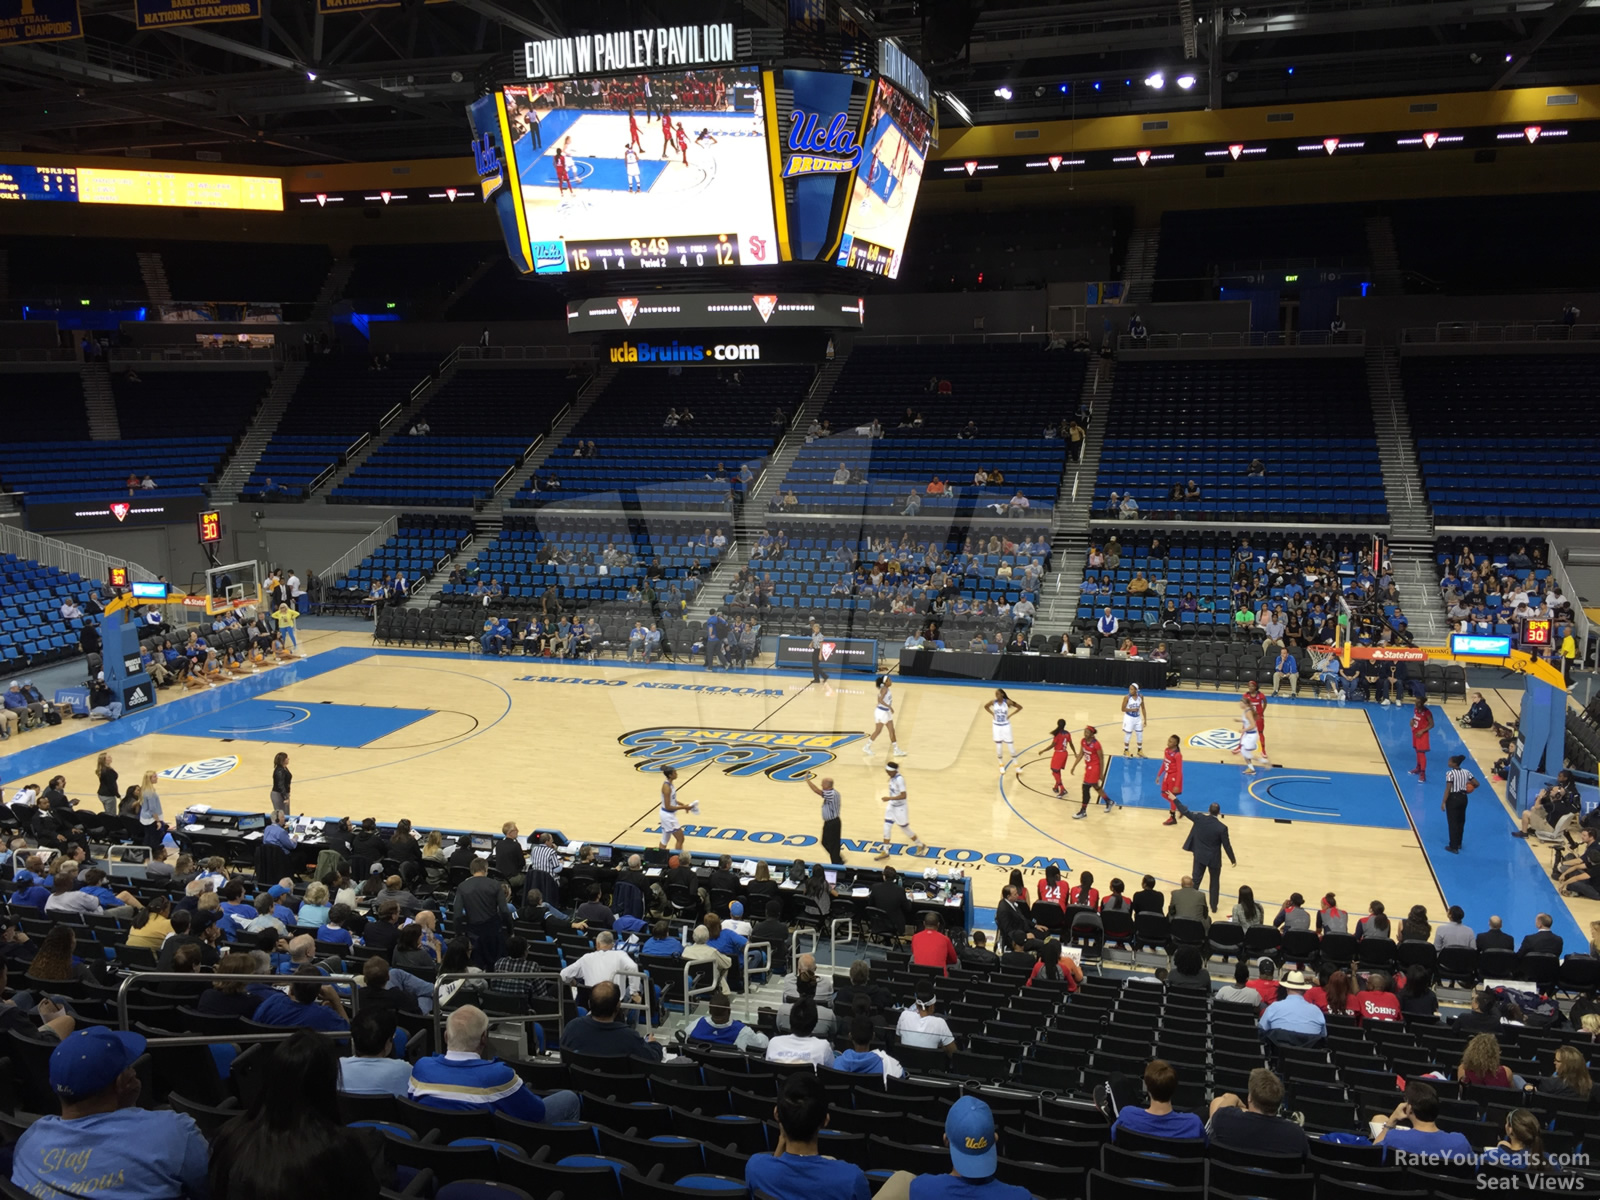 section 101, row 13 seat view  - pauley pavilion